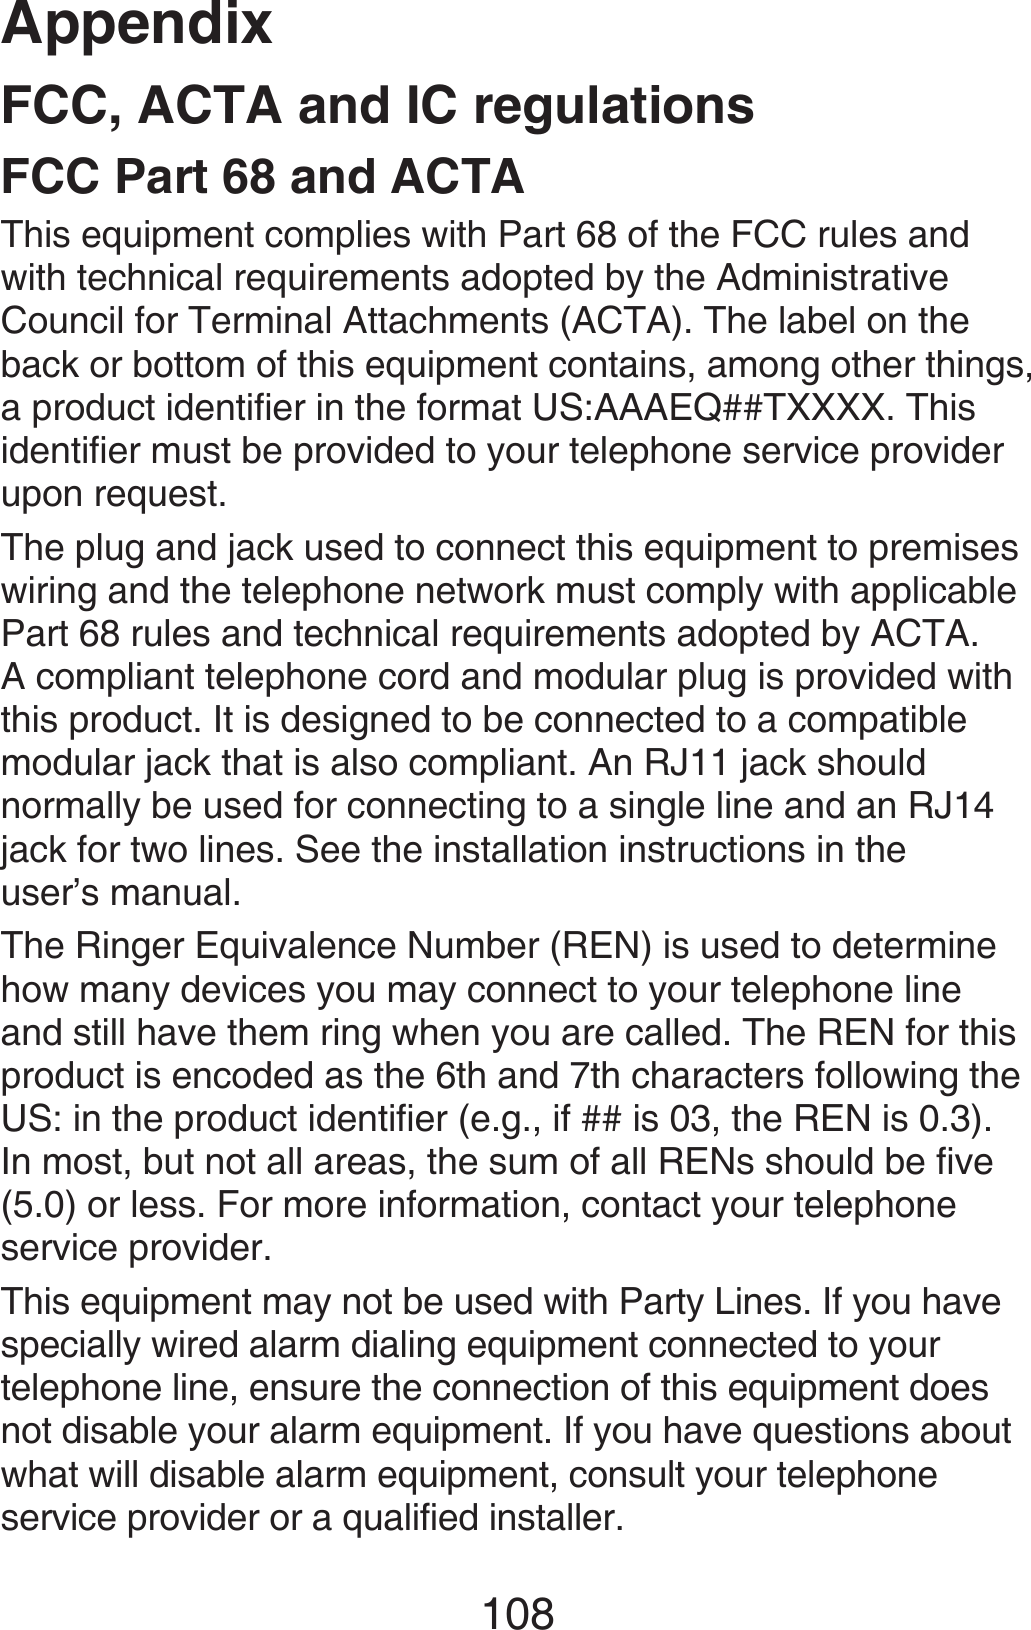 Appendix108FCC, ACTA and IC regulationsFCC Part 68 and ACTAThis equipment complies with Part 68 of the FCC rules and with technical requirements adopted by the Administrative Council for Terminal Attachments (ACTA). The label on the back or bottom of this equipment contains, among other things, a product identifier in the format US:AAAEQ##TXXXX. This identifier must be provided to your telephone service provider upon request.The plug and jack used to connect this equipment to premises wiring and the telephone network must comply with applicable Part 68 rules and technical requirements adopted by ACTA. A compliant telephone cord and modular plug is provided with this product. It is designed to be connected to a compatible modular jack that is also compliant. An RJ11 jack should normally be used for connecting to a single line and an RJ14 jack for two lines. See the installation instructions in the  user’s manual.The Ringer Equivalence Number (REN) is used to determine how many devices you may connect to your telephone line and still have them ring when you are called. The REN for this product is encoded as the 6th and 7th characters following the US: in the product identifier (e.g., if ## is 03, the REN is 0.3). In most, but not all areas, the sum of all RENs should be five (5.0) or less. For more information, contact your telephone service provider.This equipment may not be used with Party Lines. If you have specially wired alarm dialing equipment connected to your telephone line, ensure the connection of this equipment does not disable your alarm equipment. If you have questions about what will disable alarm equipment, consult your telephone service provider or a qualified installer.